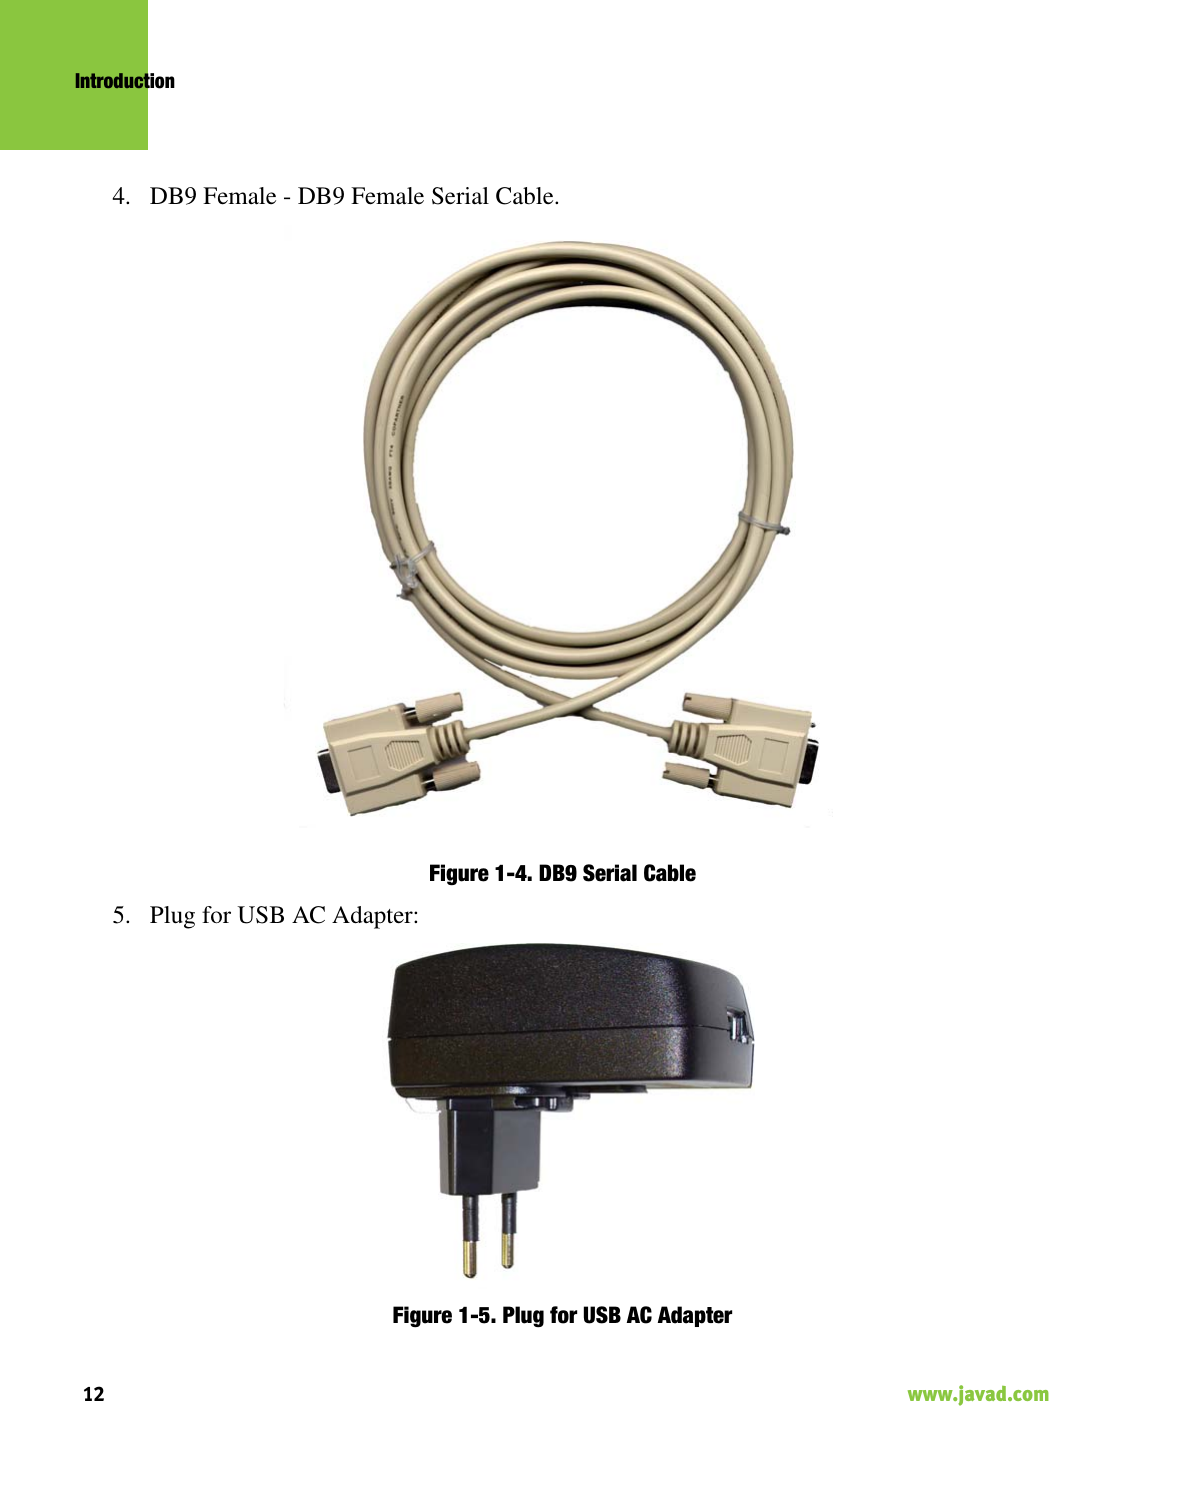 Introduction12                                                                                                                     www.javad.com4. DB9 Female - DB9 Female Serial Cable. Figure 1-4. DB9 Serial Cable5. Plug for USB AC Adapter: Figure 1-5. Plug for USB AC Adapter